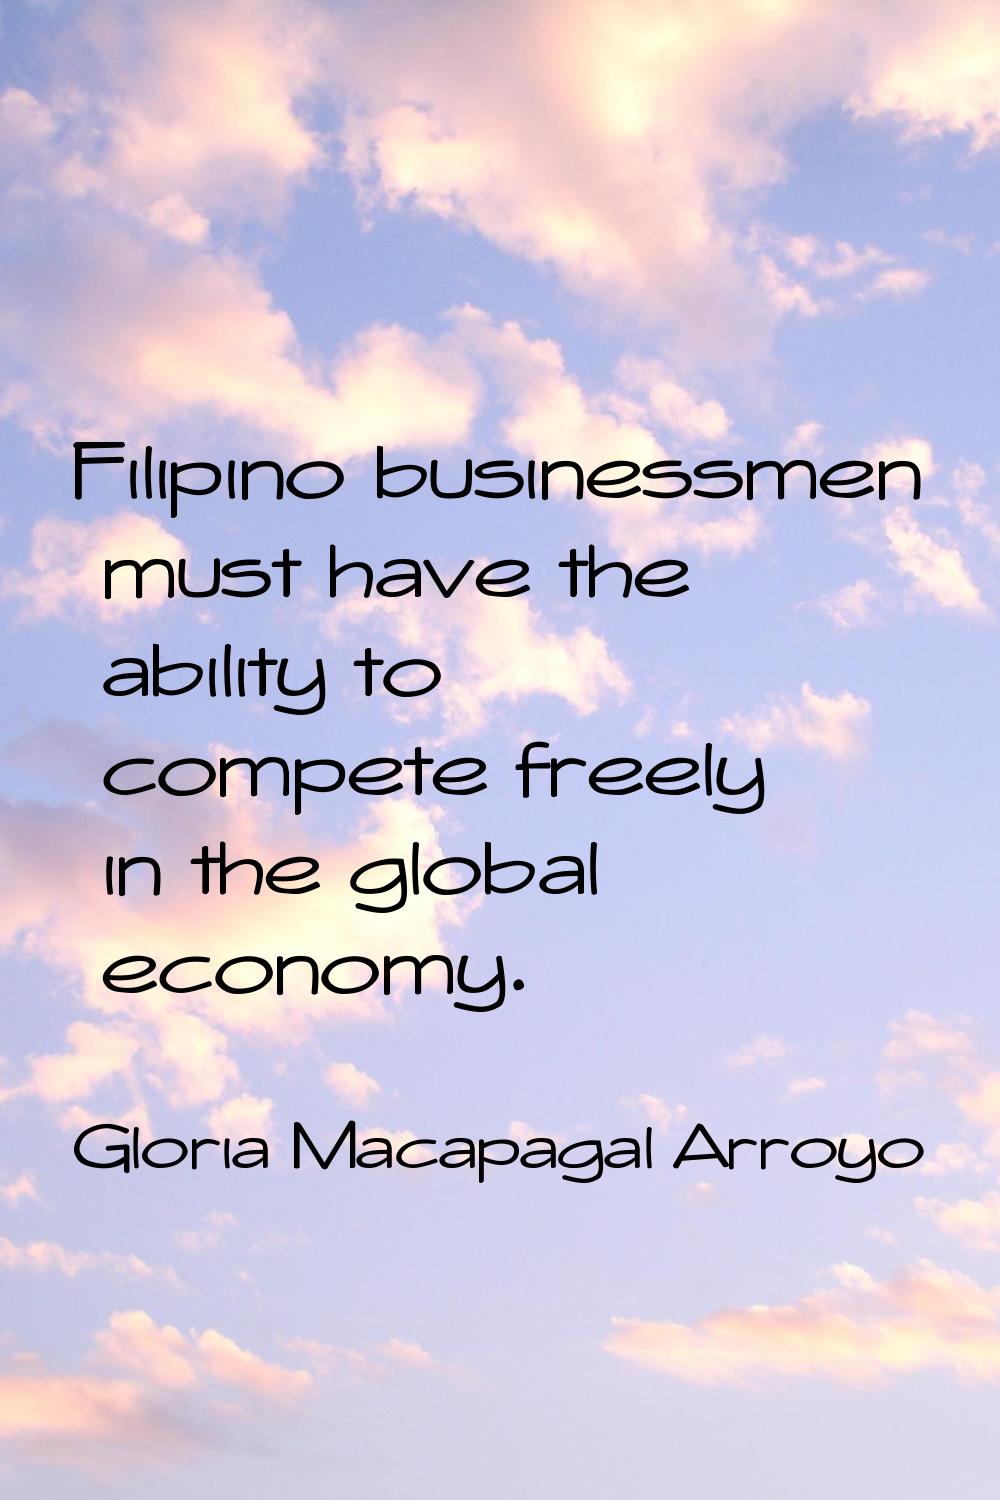 Filipino businessmen must have the ability to compete freely in the global economy.